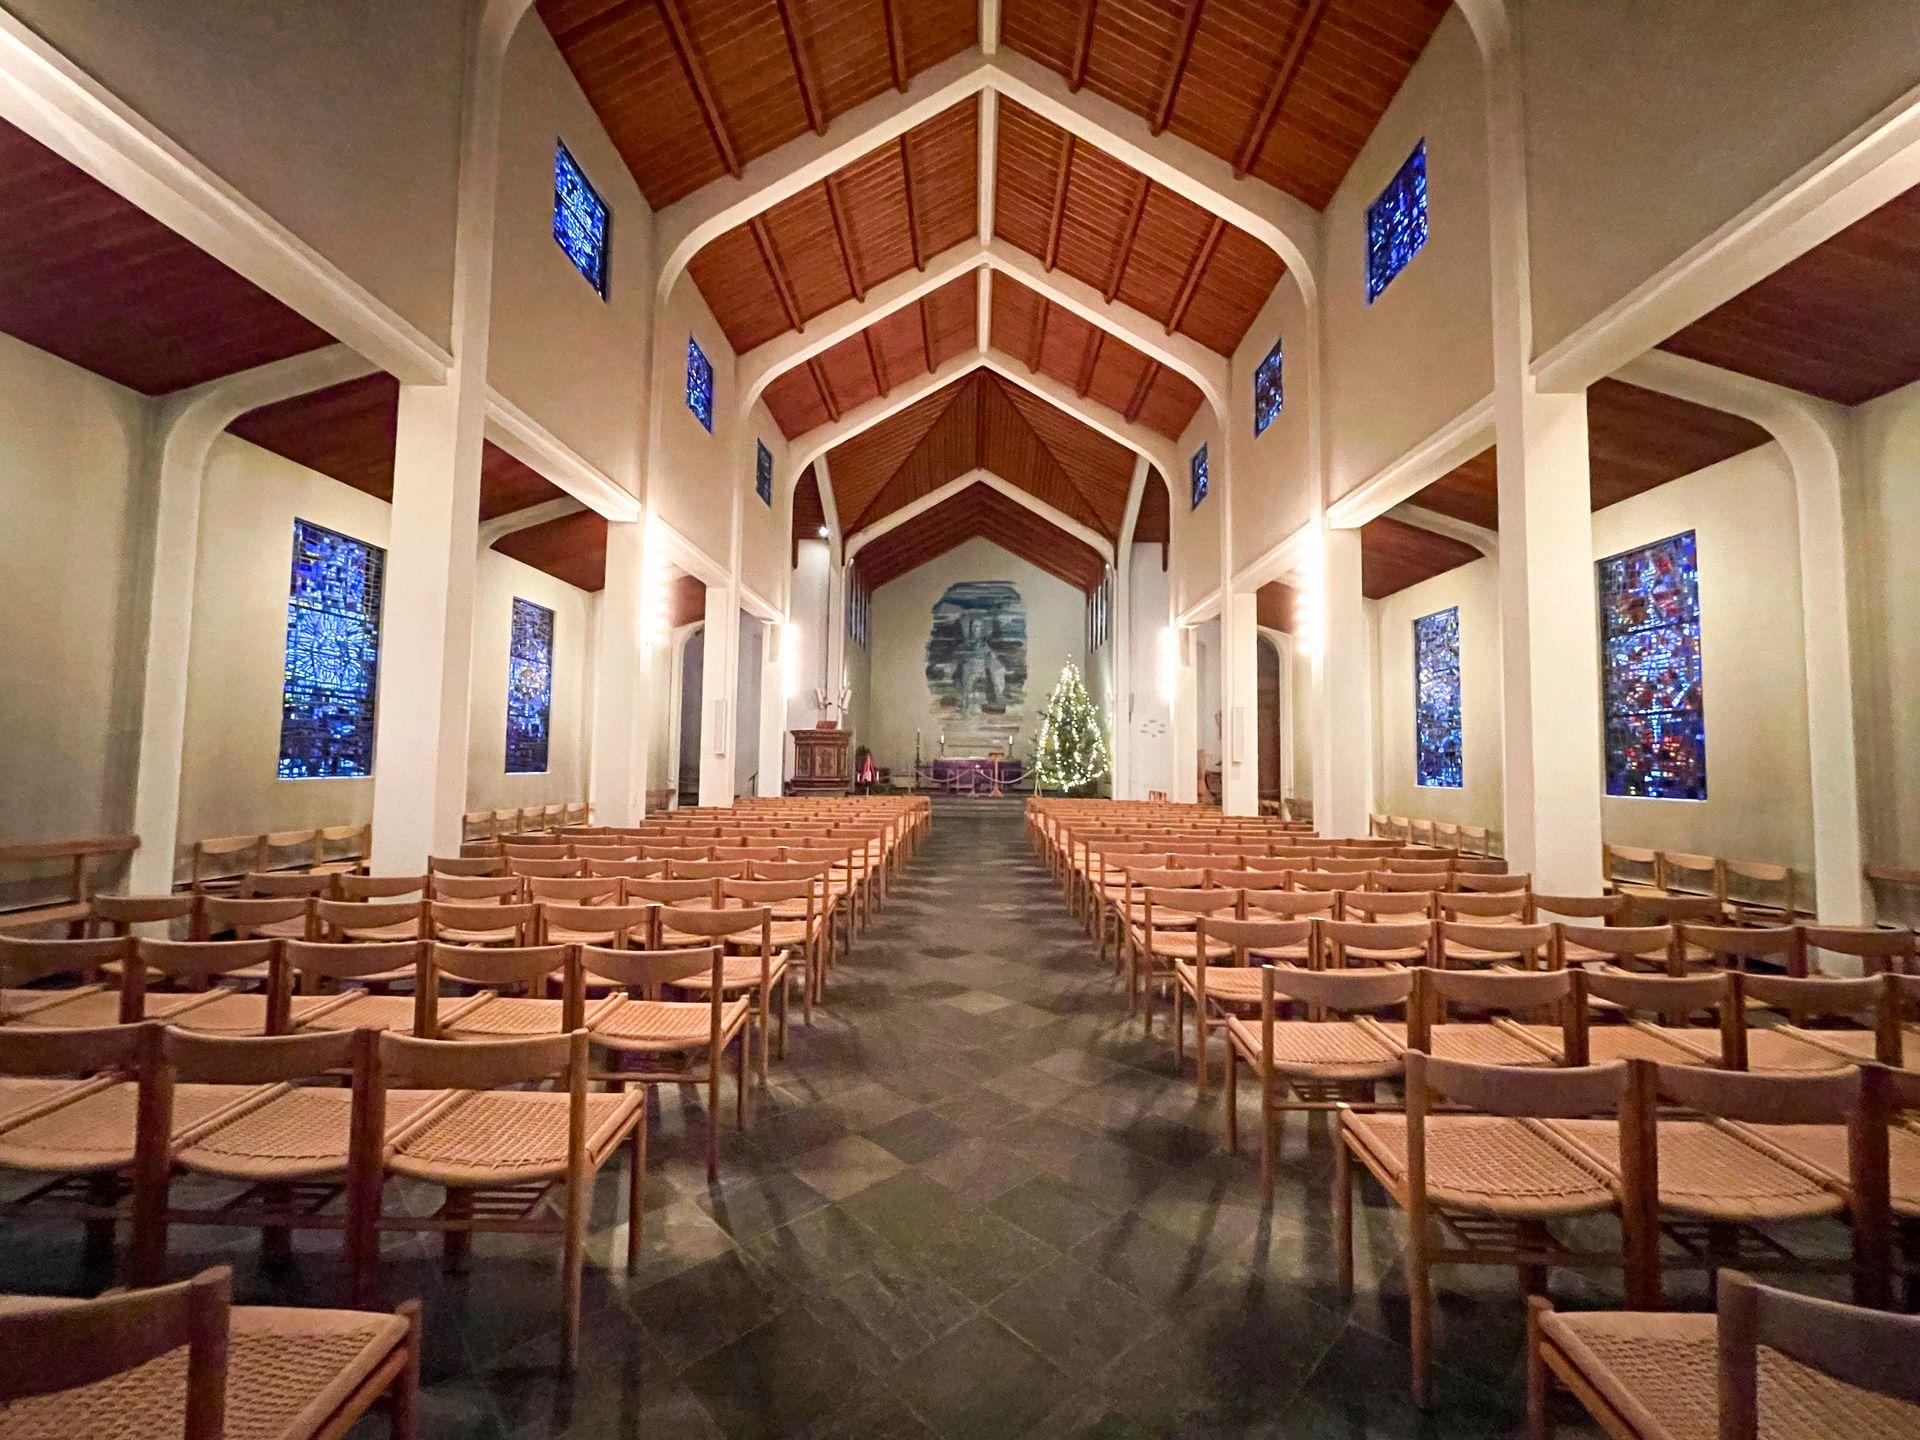 The interior of Skalholt Church.  The walls are white with a brown ceiling and brown chairs. There are stained glass windows on the walls.